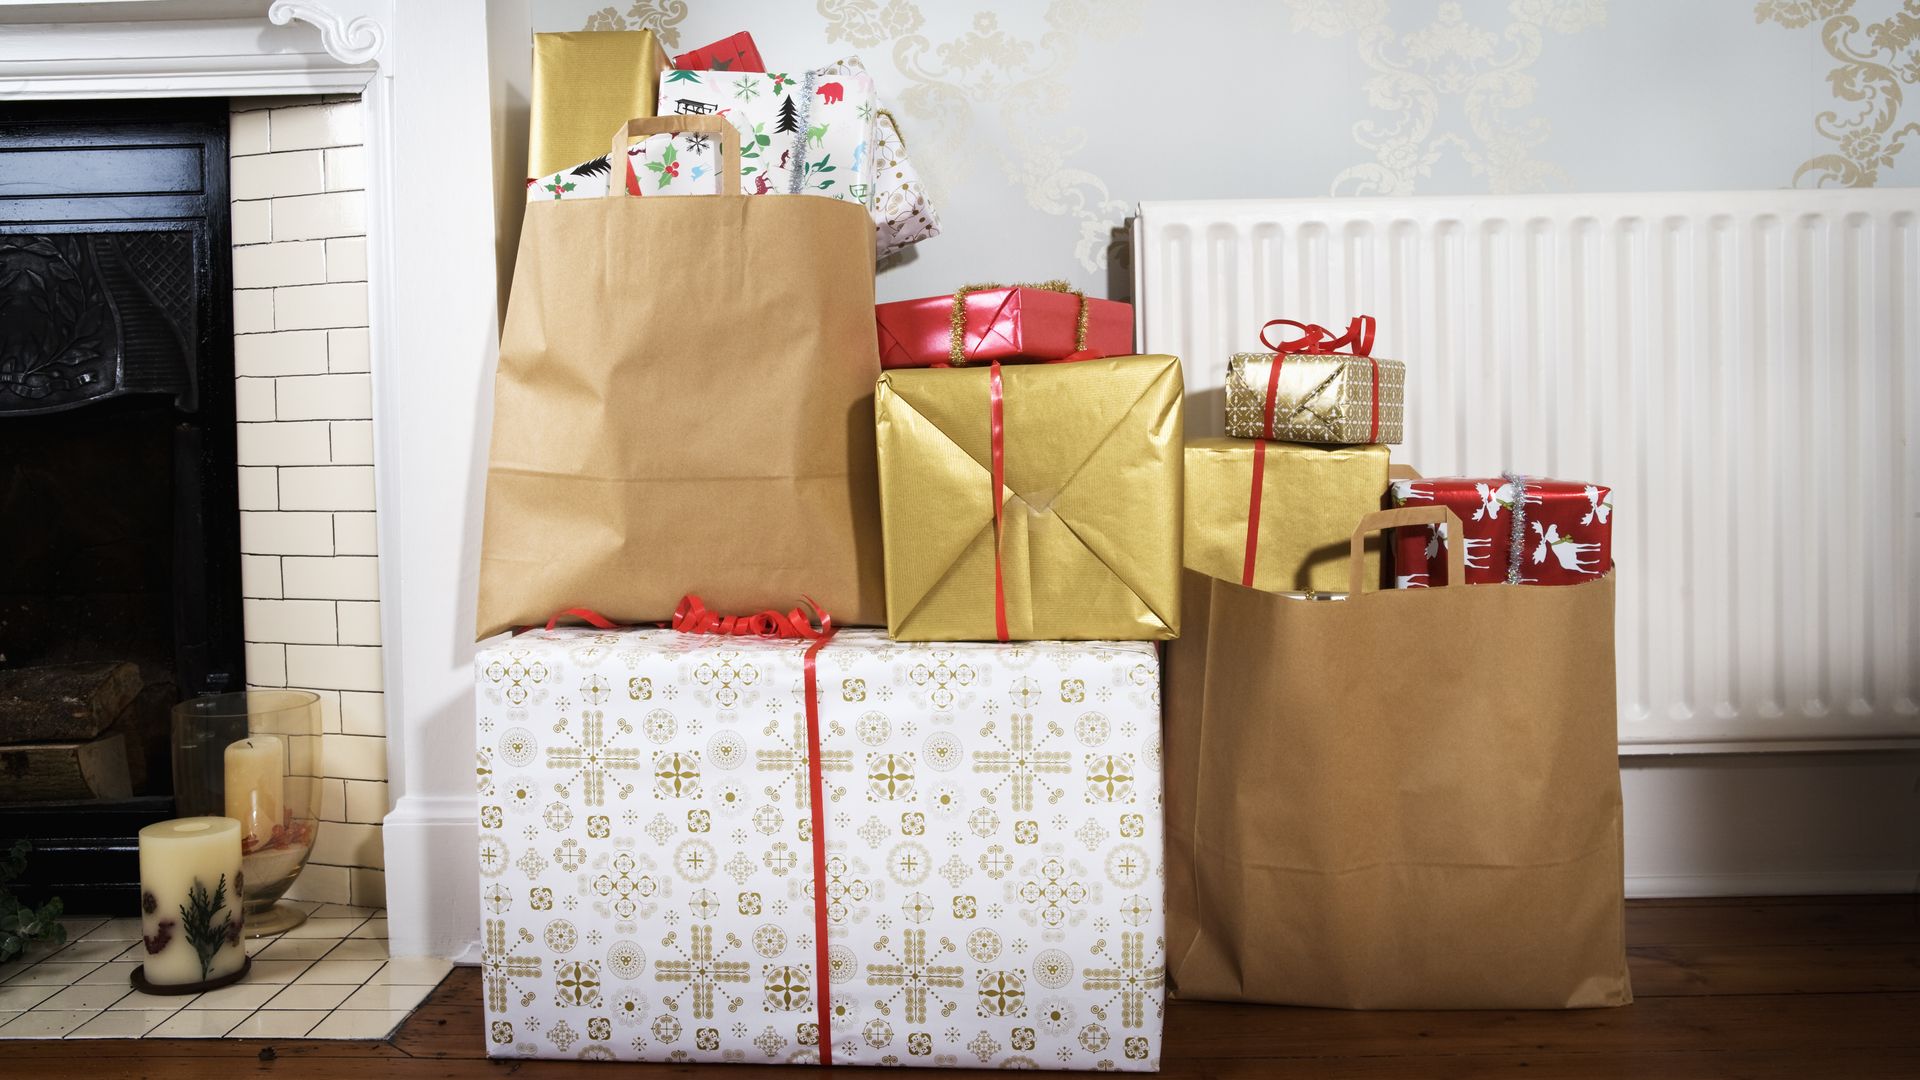 Presents in shopping bags in living room